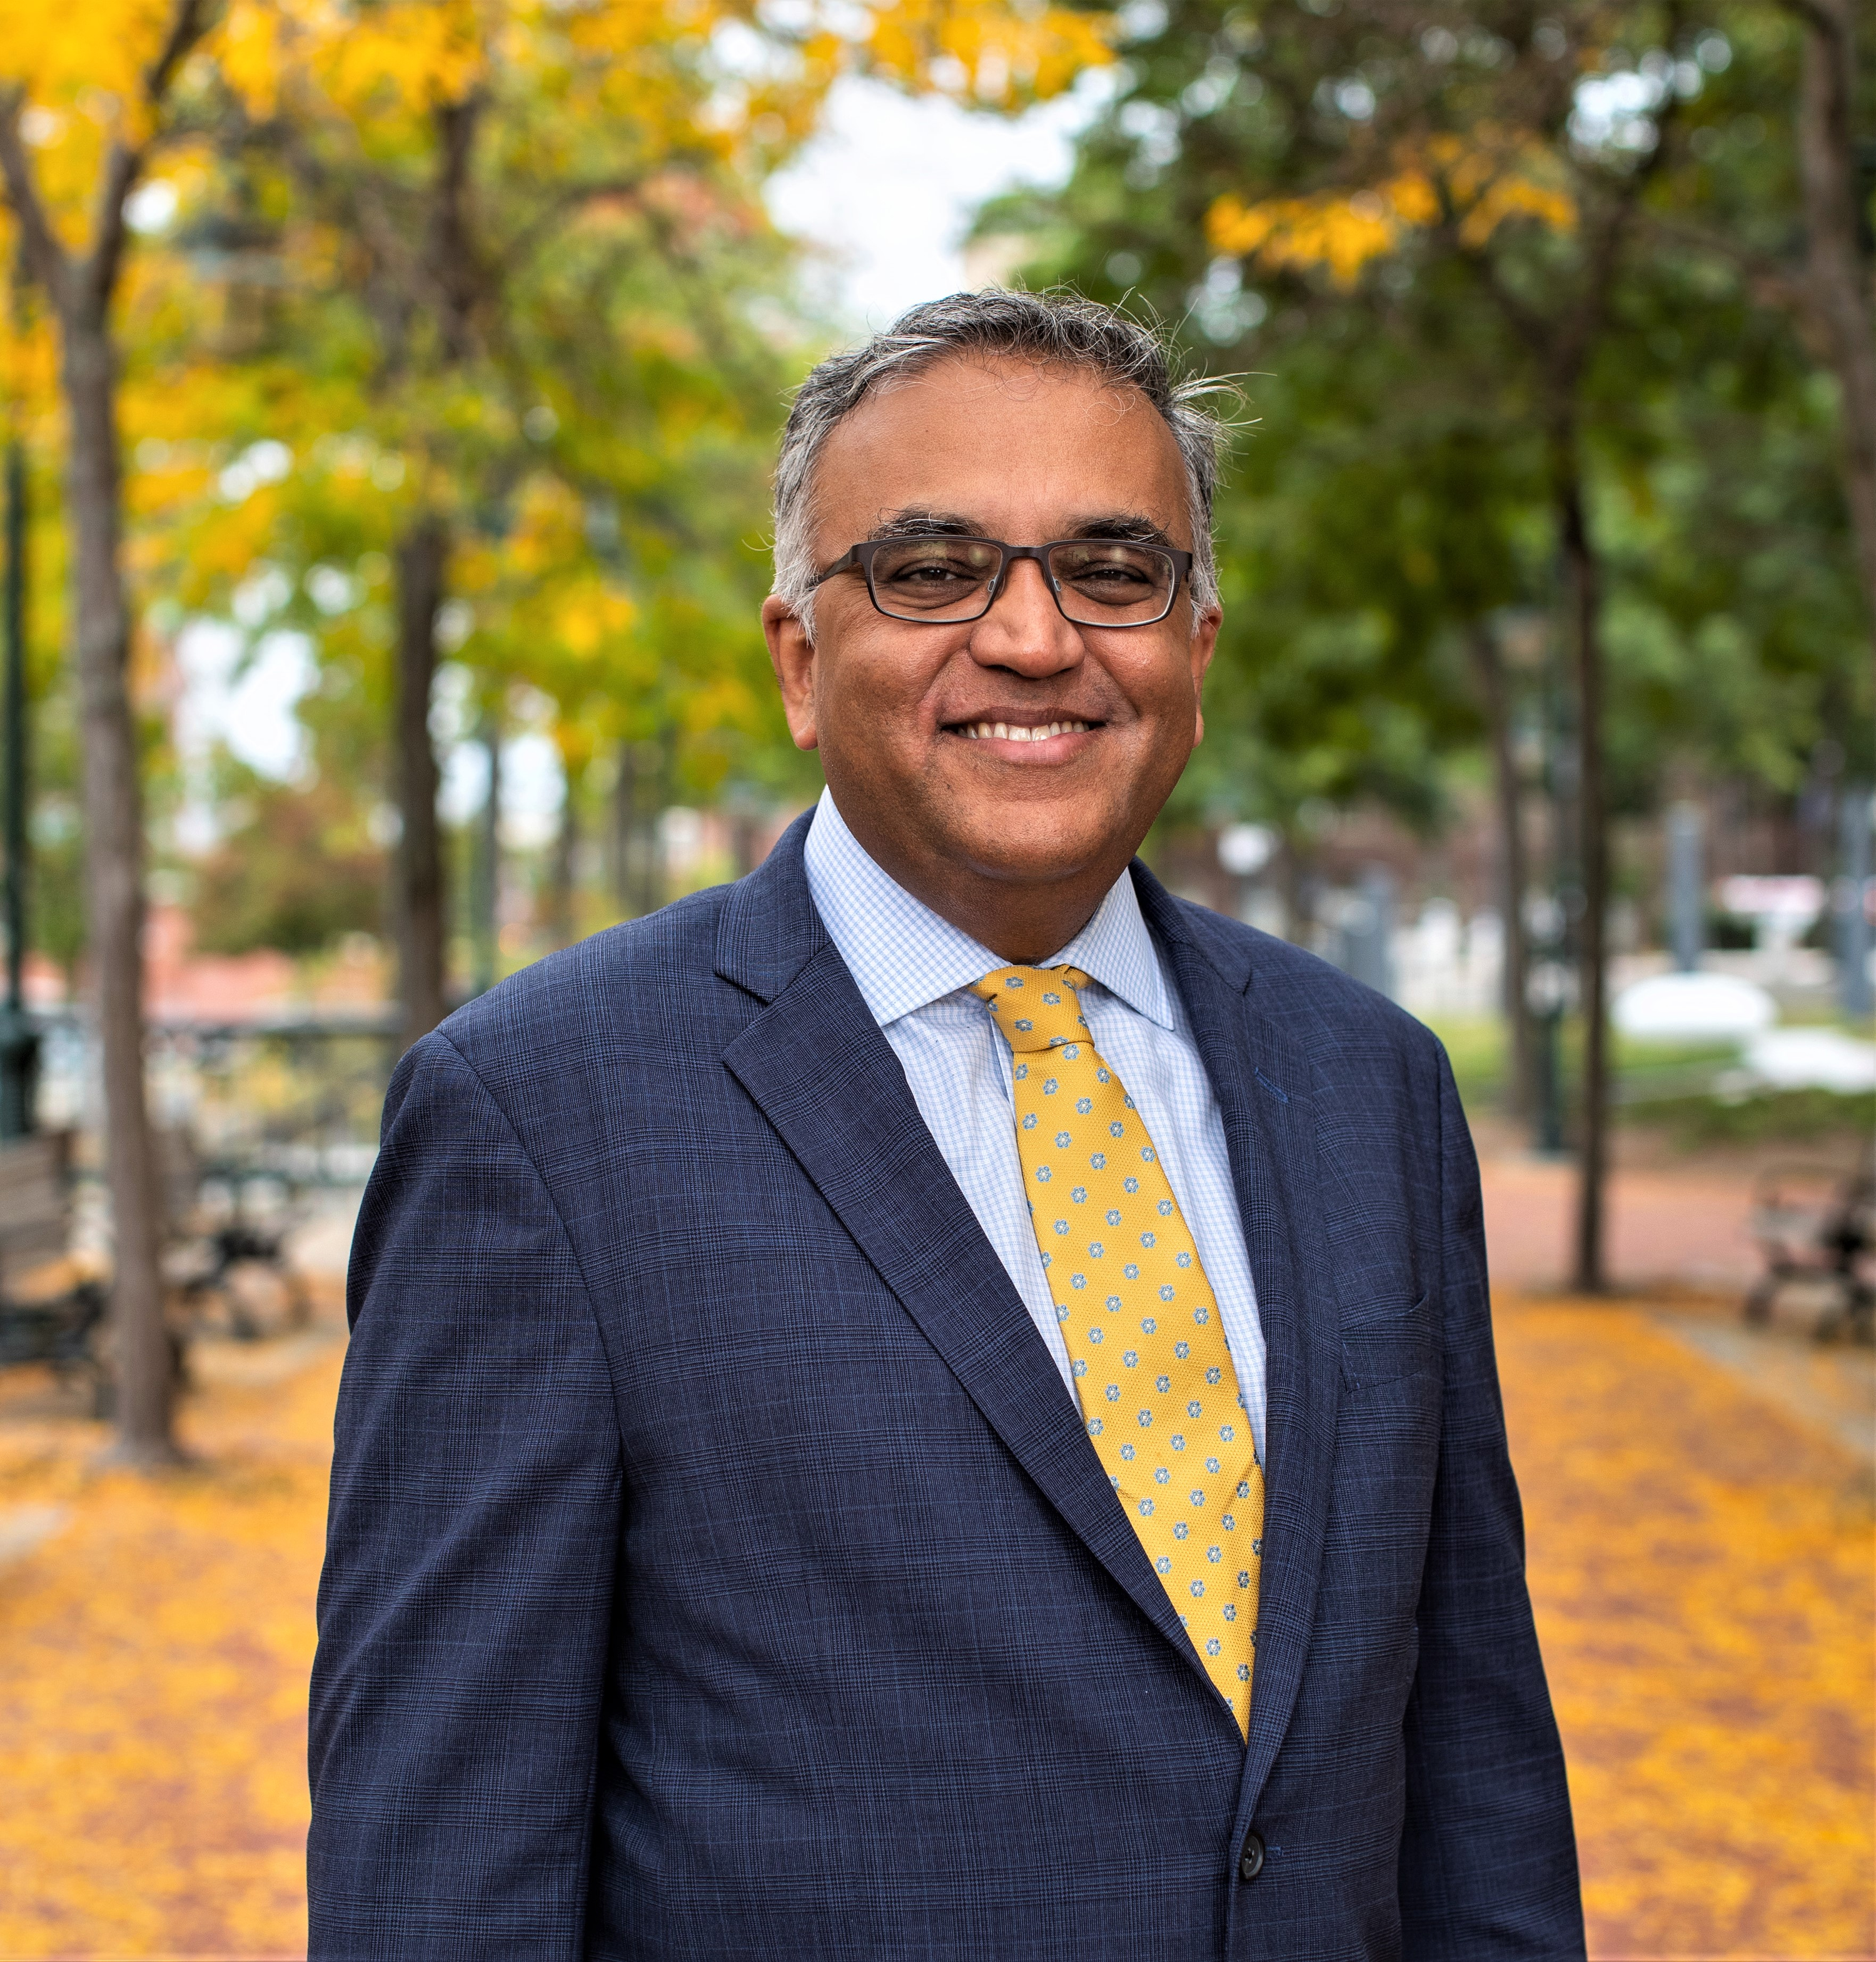 Welcome to Episode 38 of “COVID: What comes next,” an exclusive weekly Providence Journal/USA TODAY NETWORK podcast featuring Dr. Ashish Jha, dean of the Brown University School of Public Health and an internationally respected expert on pandemic response and preparedness